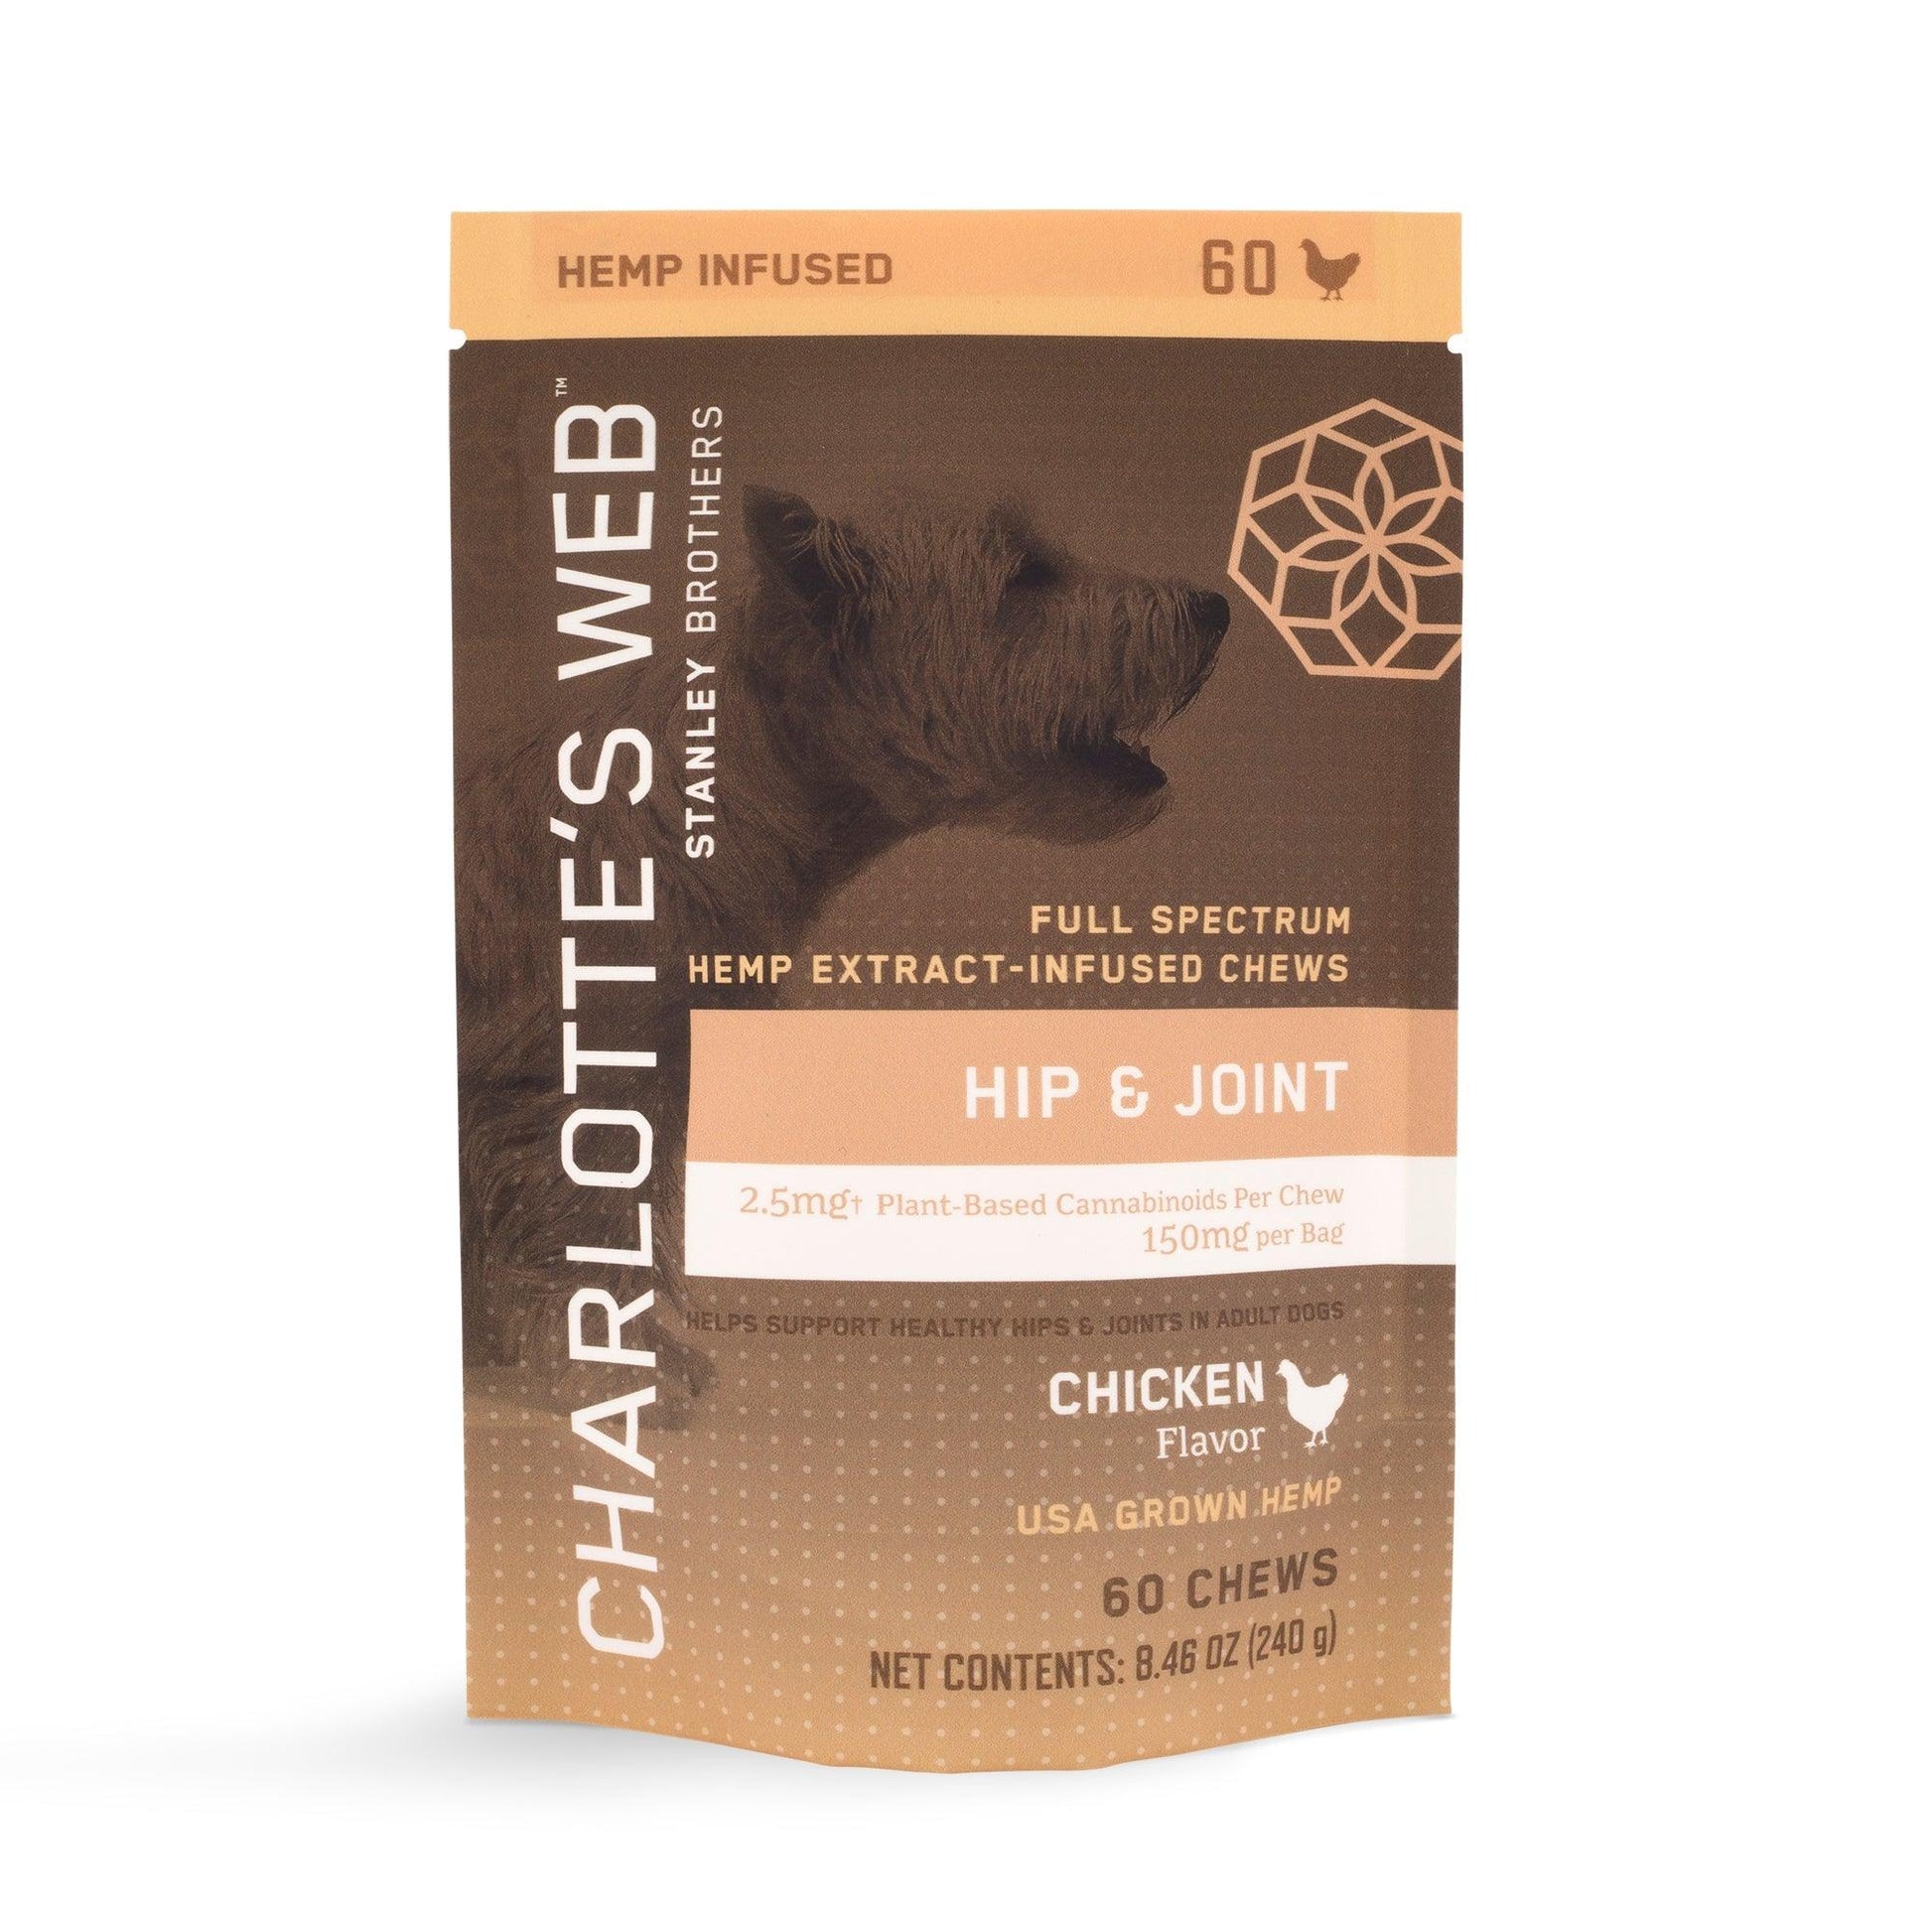 Charlotte's Web CBD hip and joint 60 chews for dogs